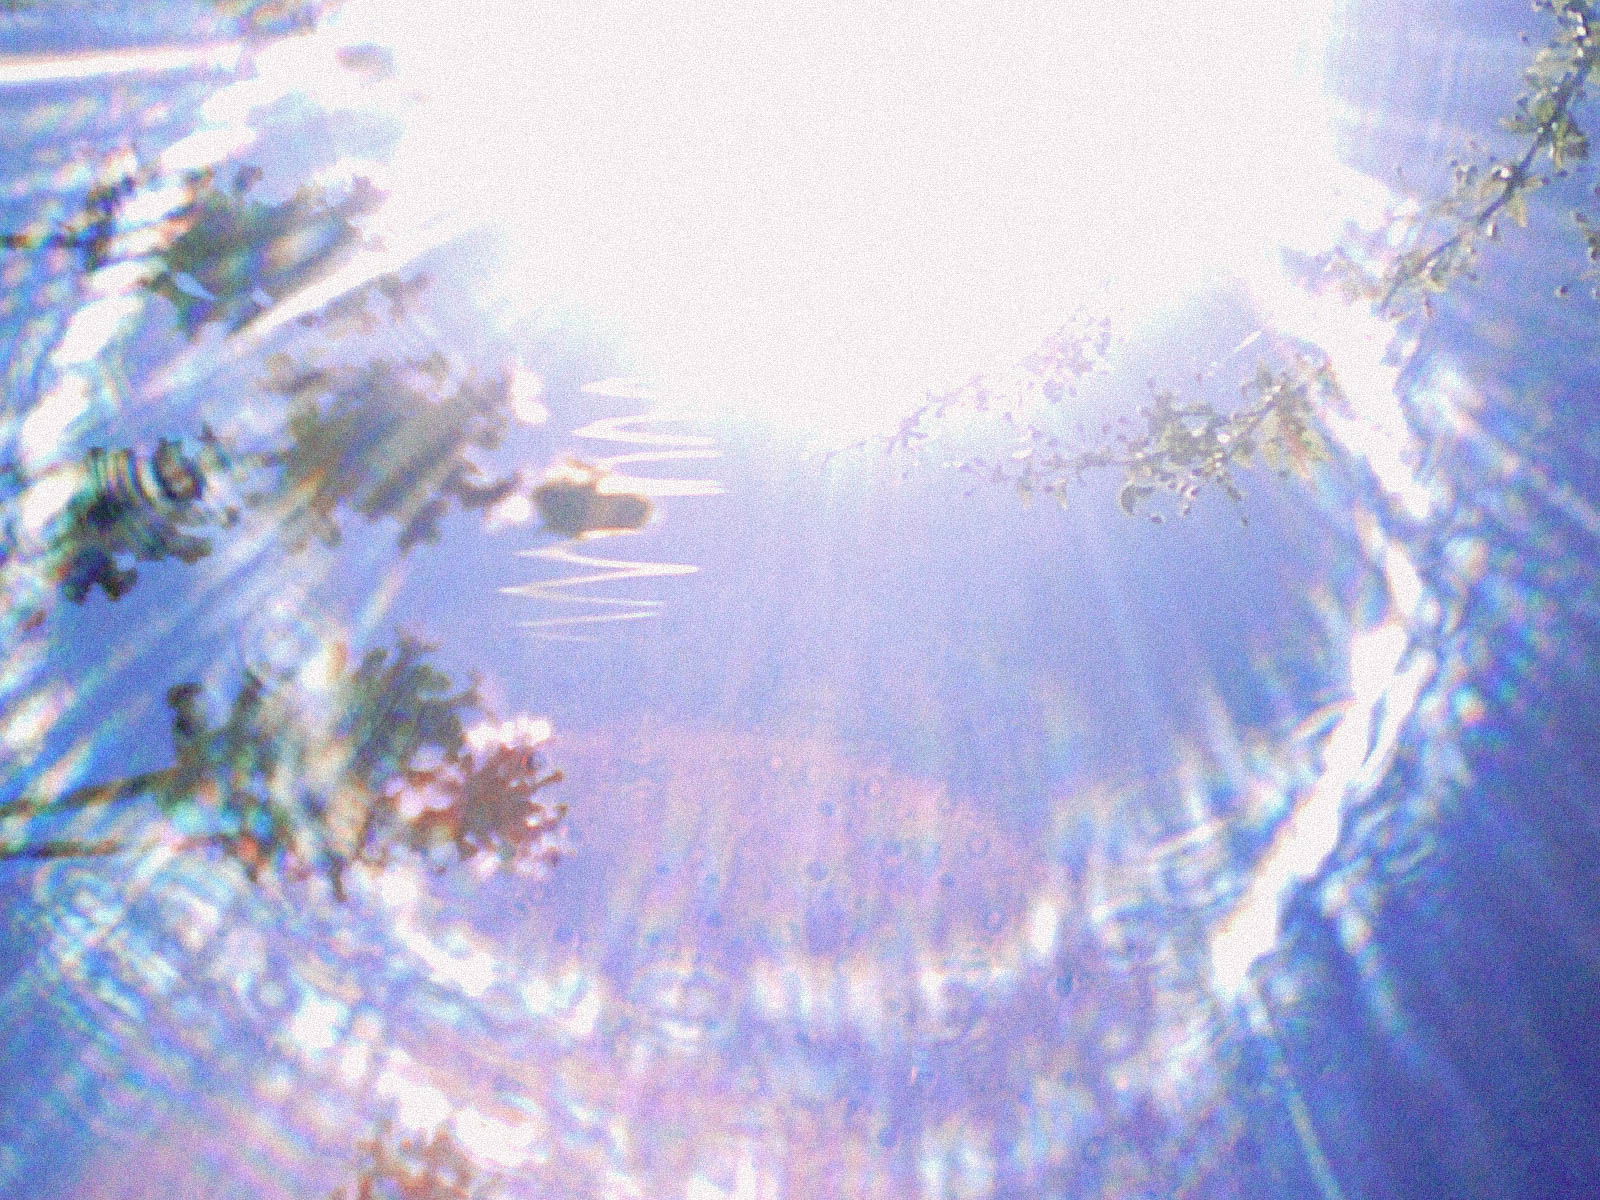 A view of the sun shining brightly in the sky, creating lens flares and rays of light with tree branches partially visible.